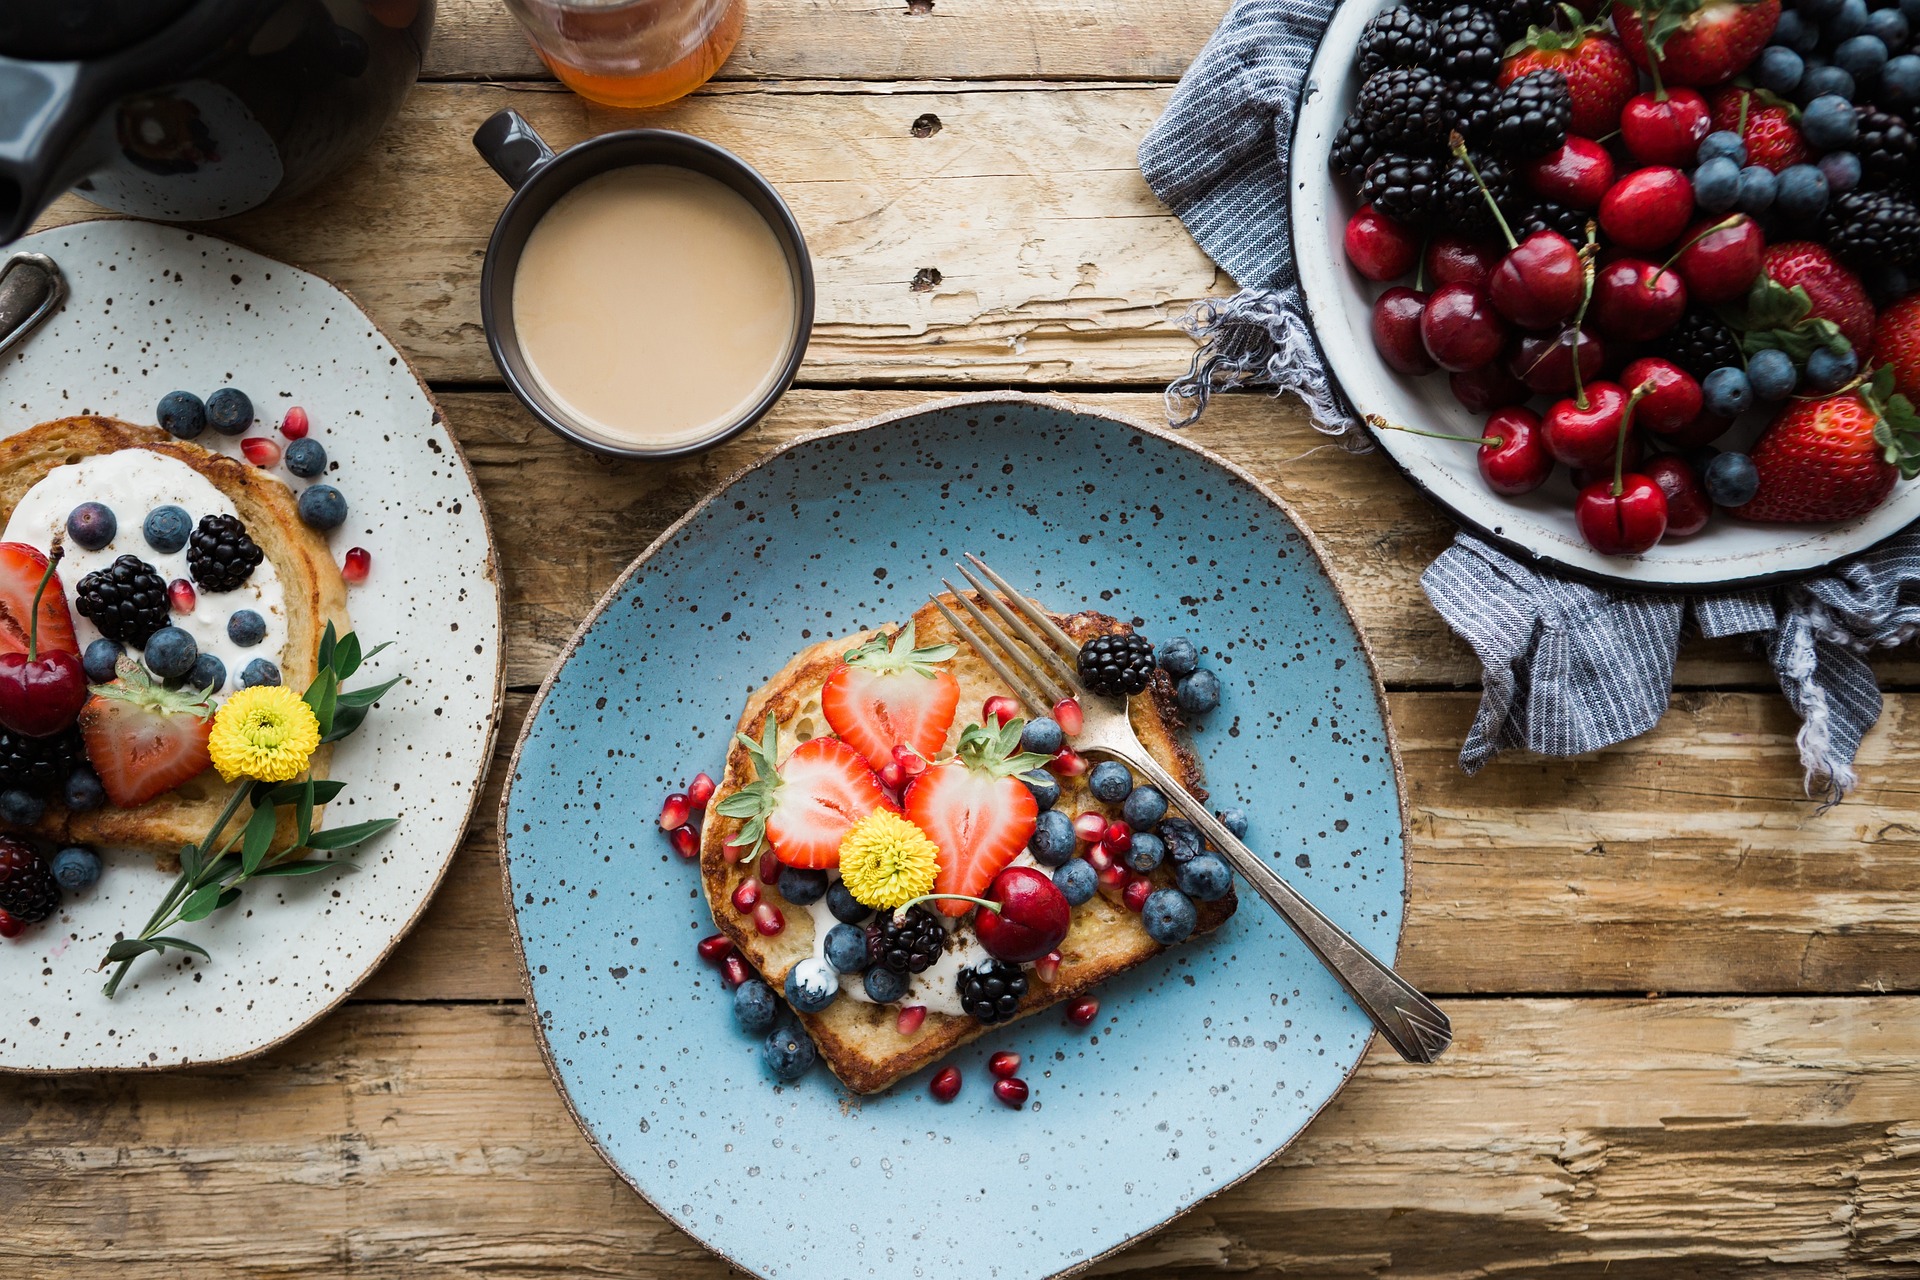 Toast with berries and a cup of coffee.